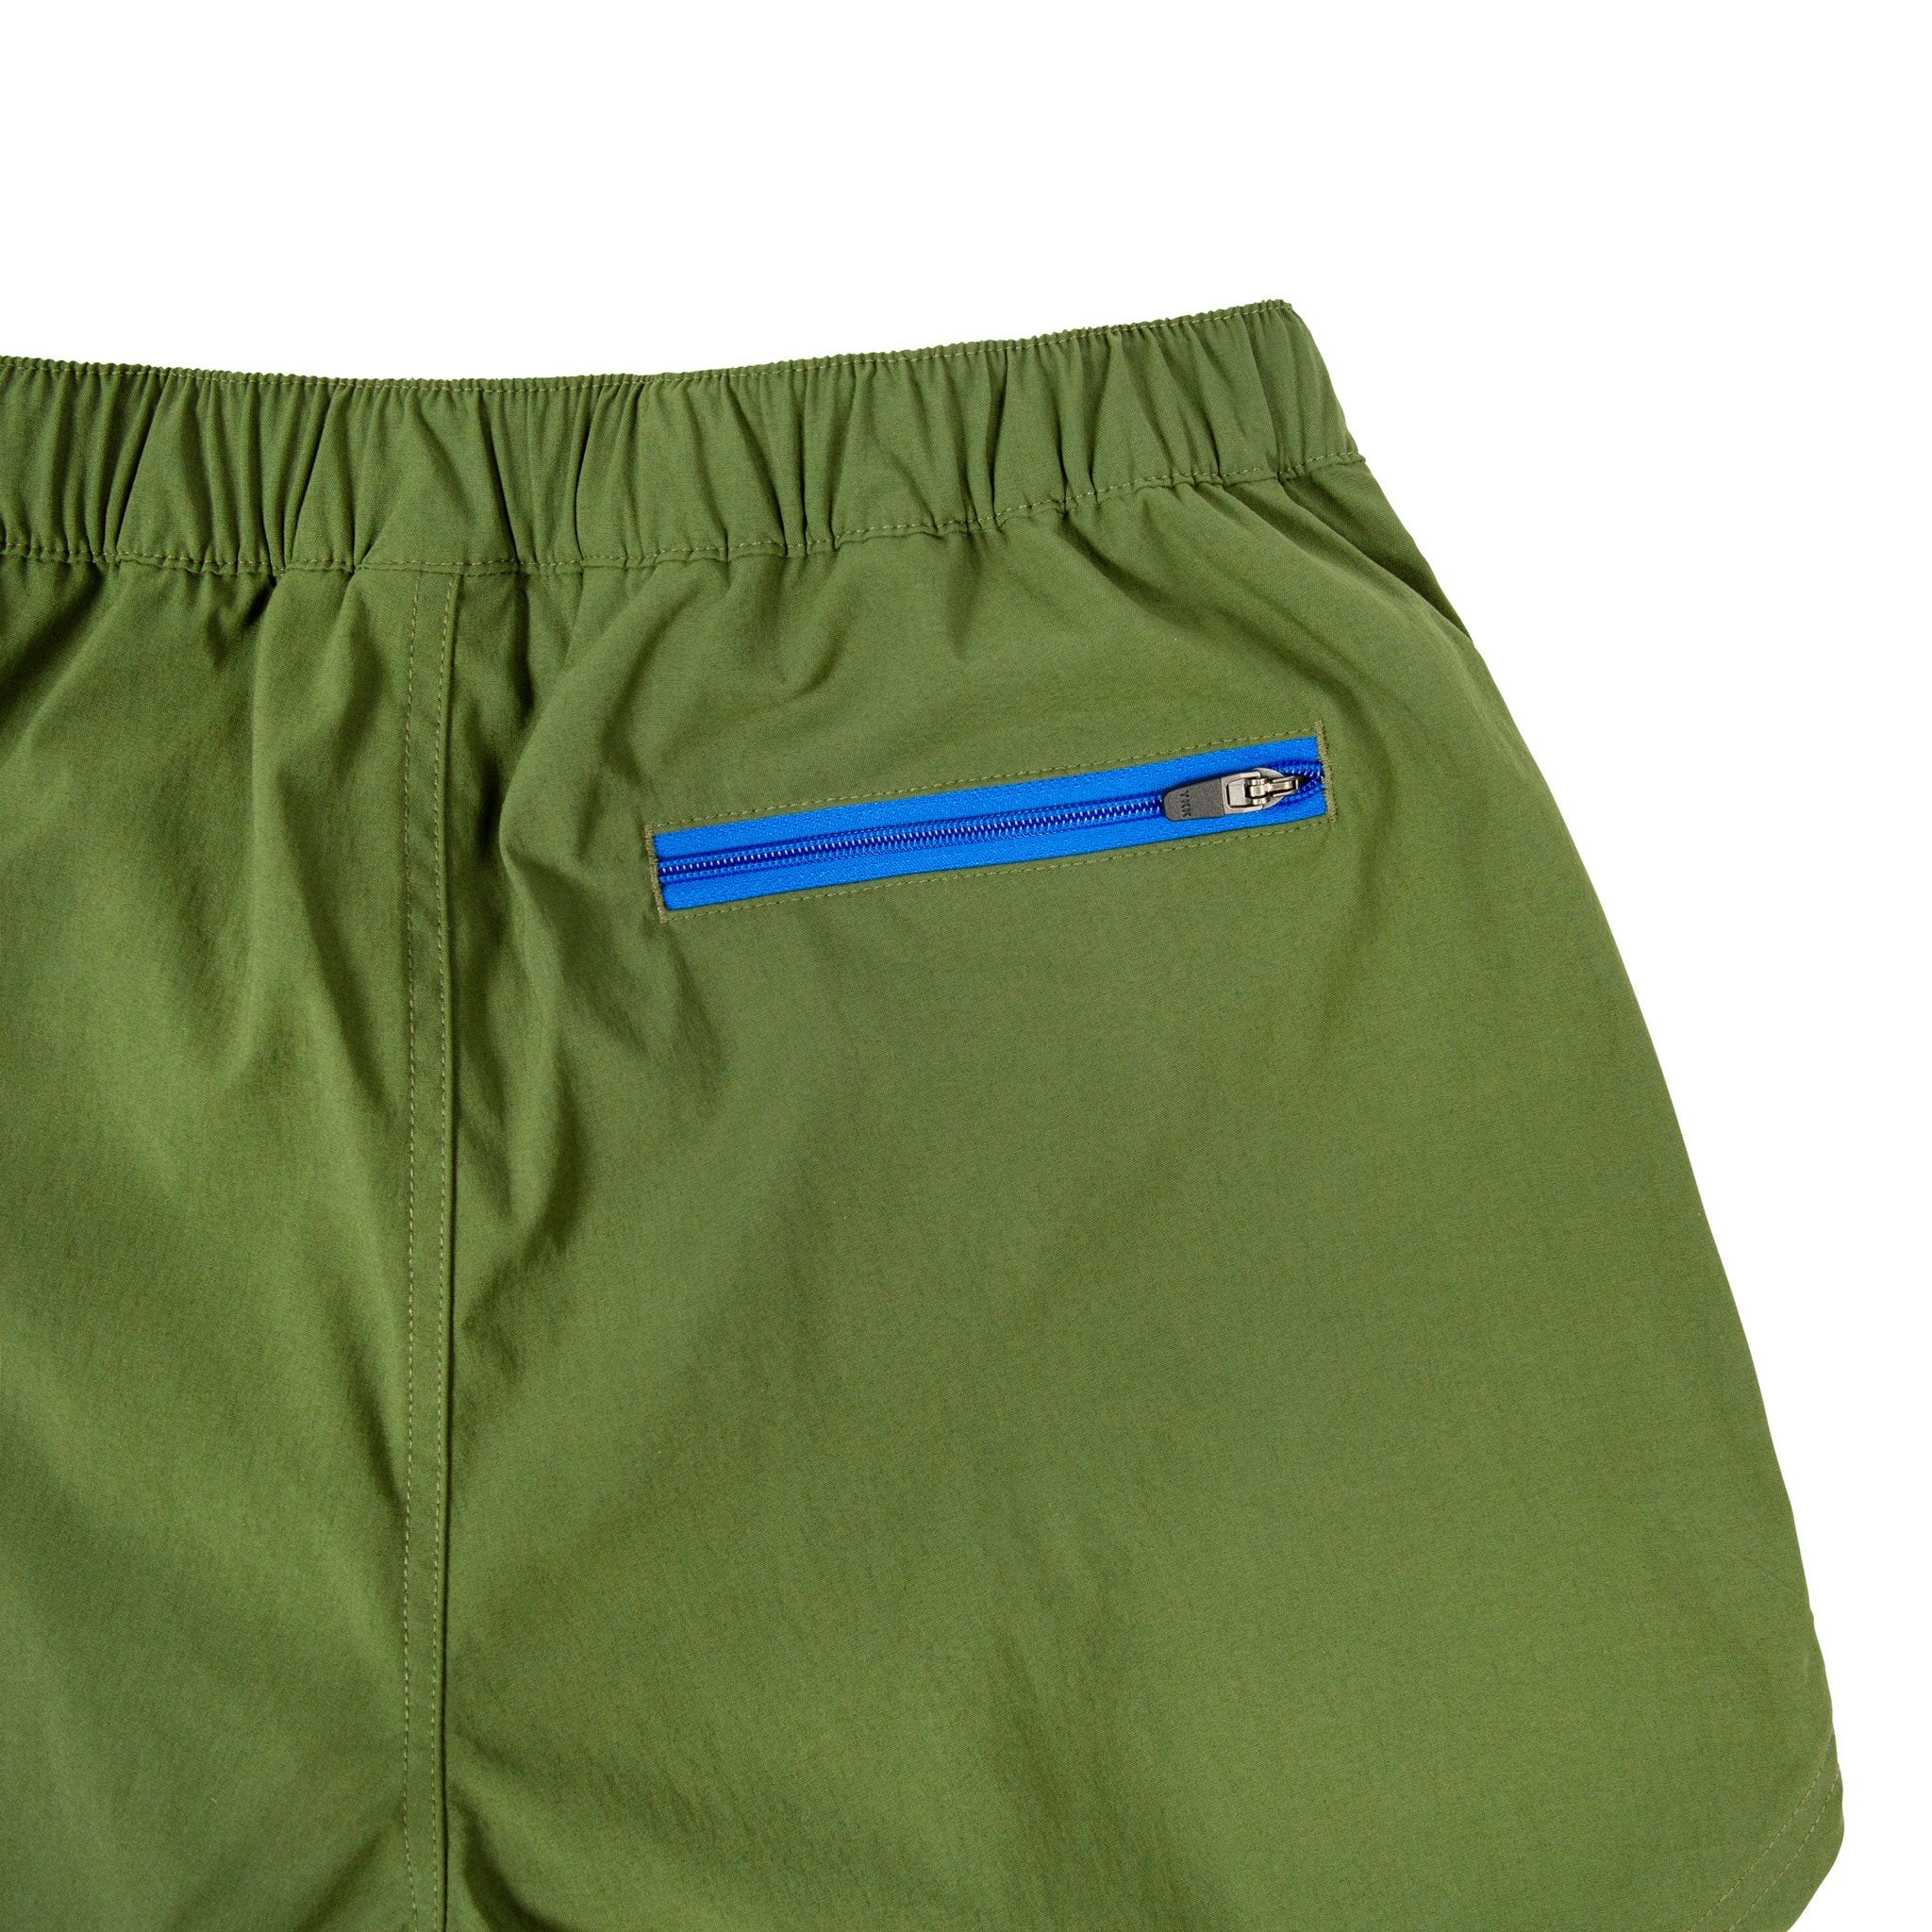 General Detail Shot of Topo Designs Women's River Shorts in Olive green showing back zipper security pocket.